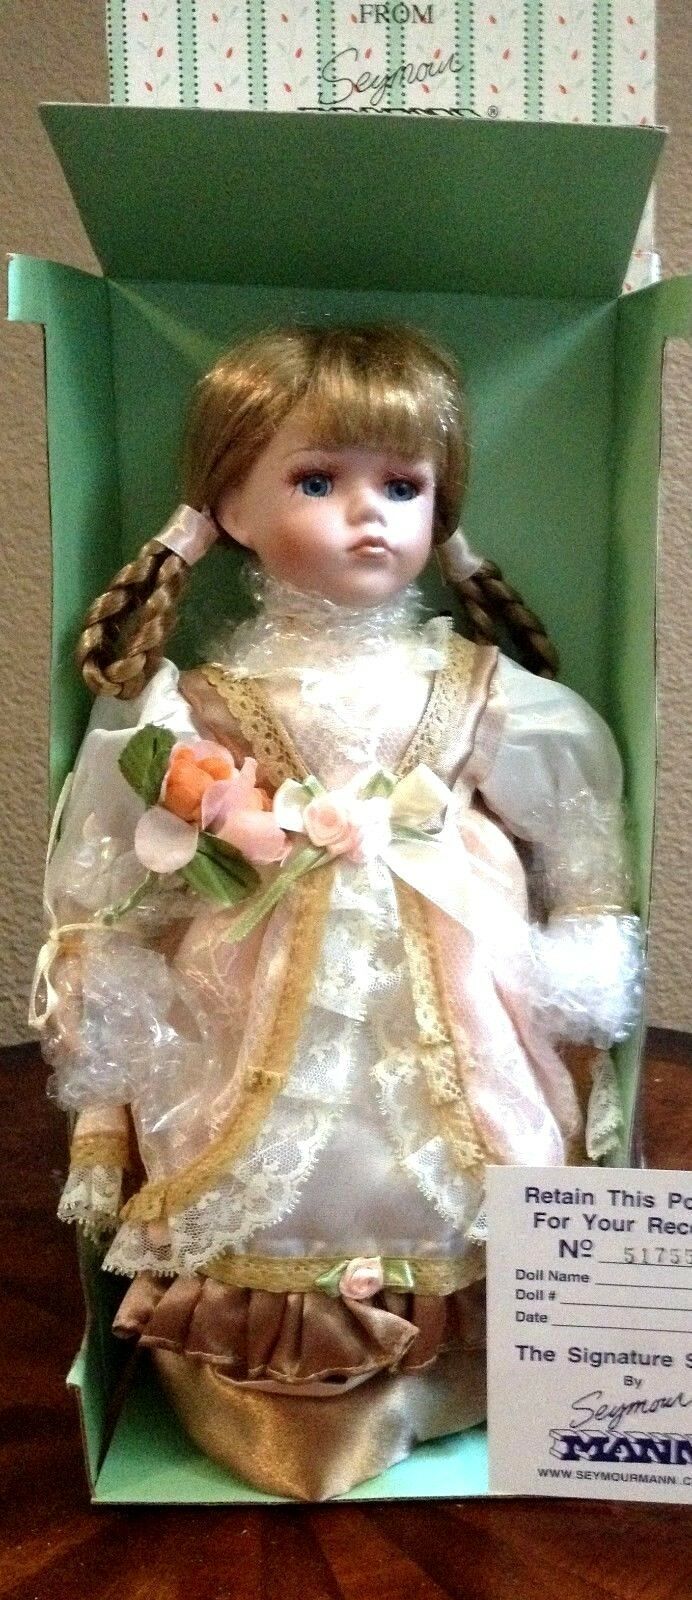 Seymour Mann Connoisseur Collection Porcelain Dolls "cissy" Doll With Stand